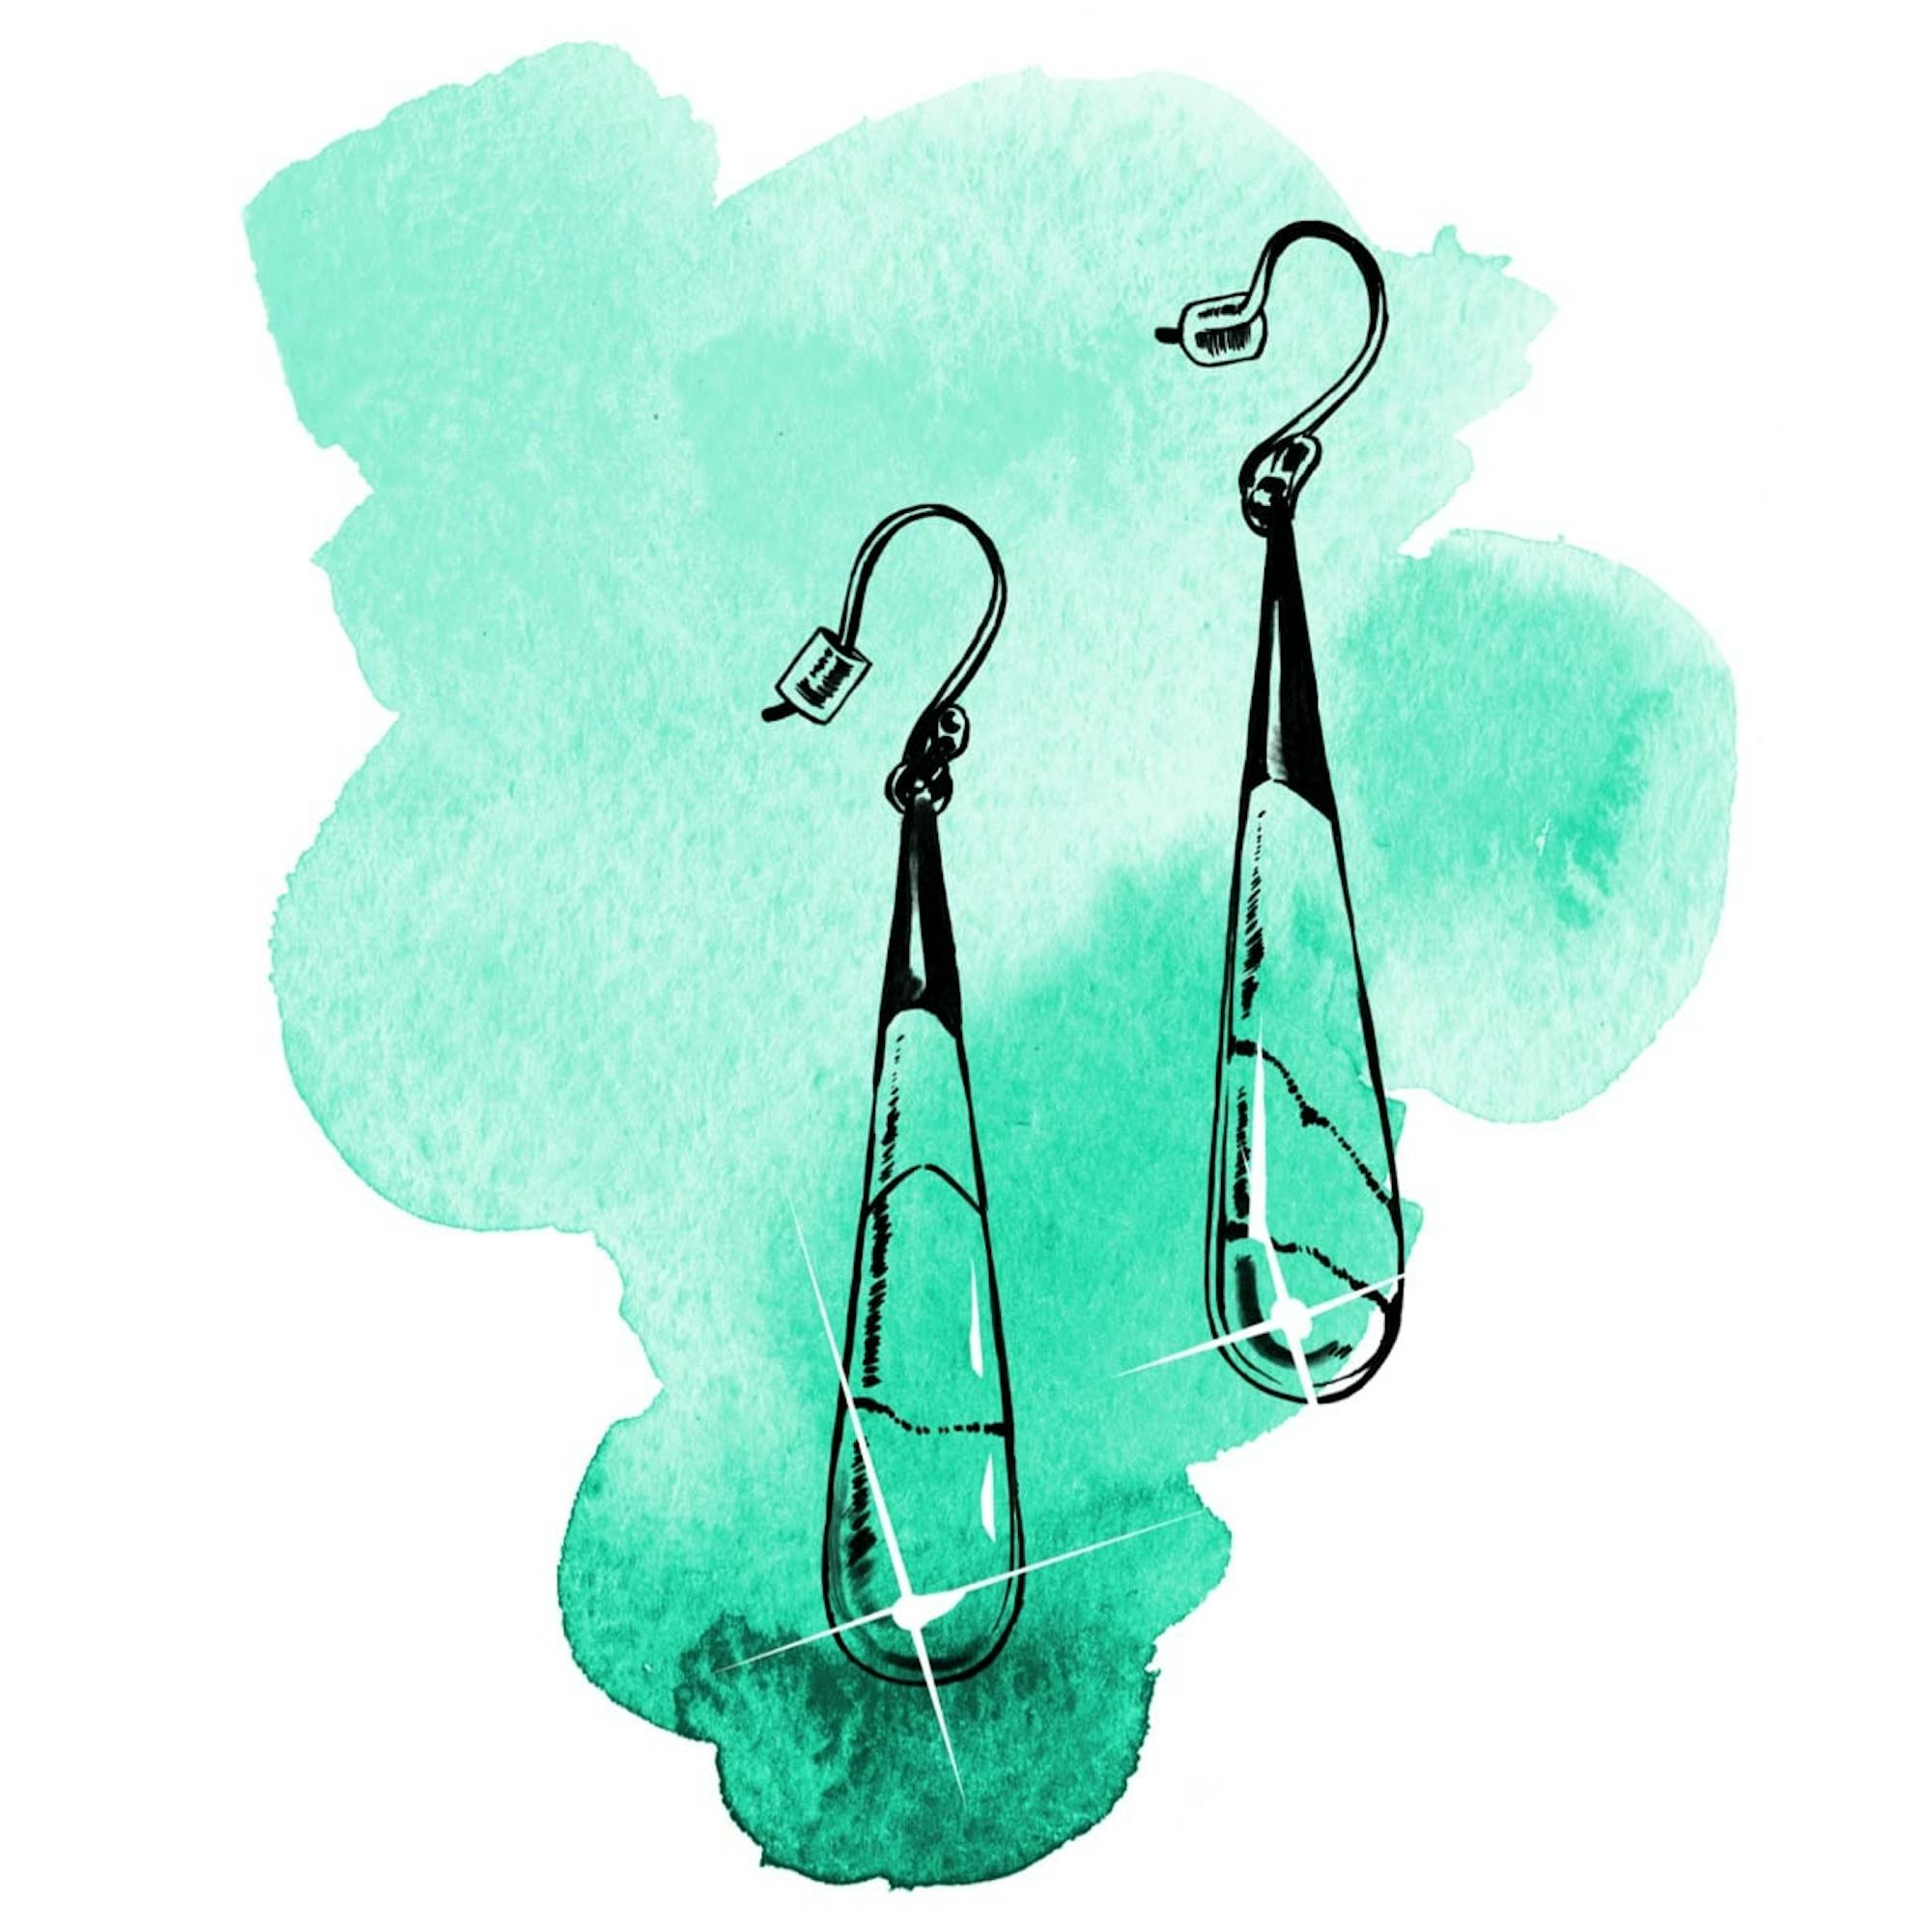 A watercolor illustration of the turquoise teardrop earrings that Jo Ellen wore to her first prom. Can you say glamour?